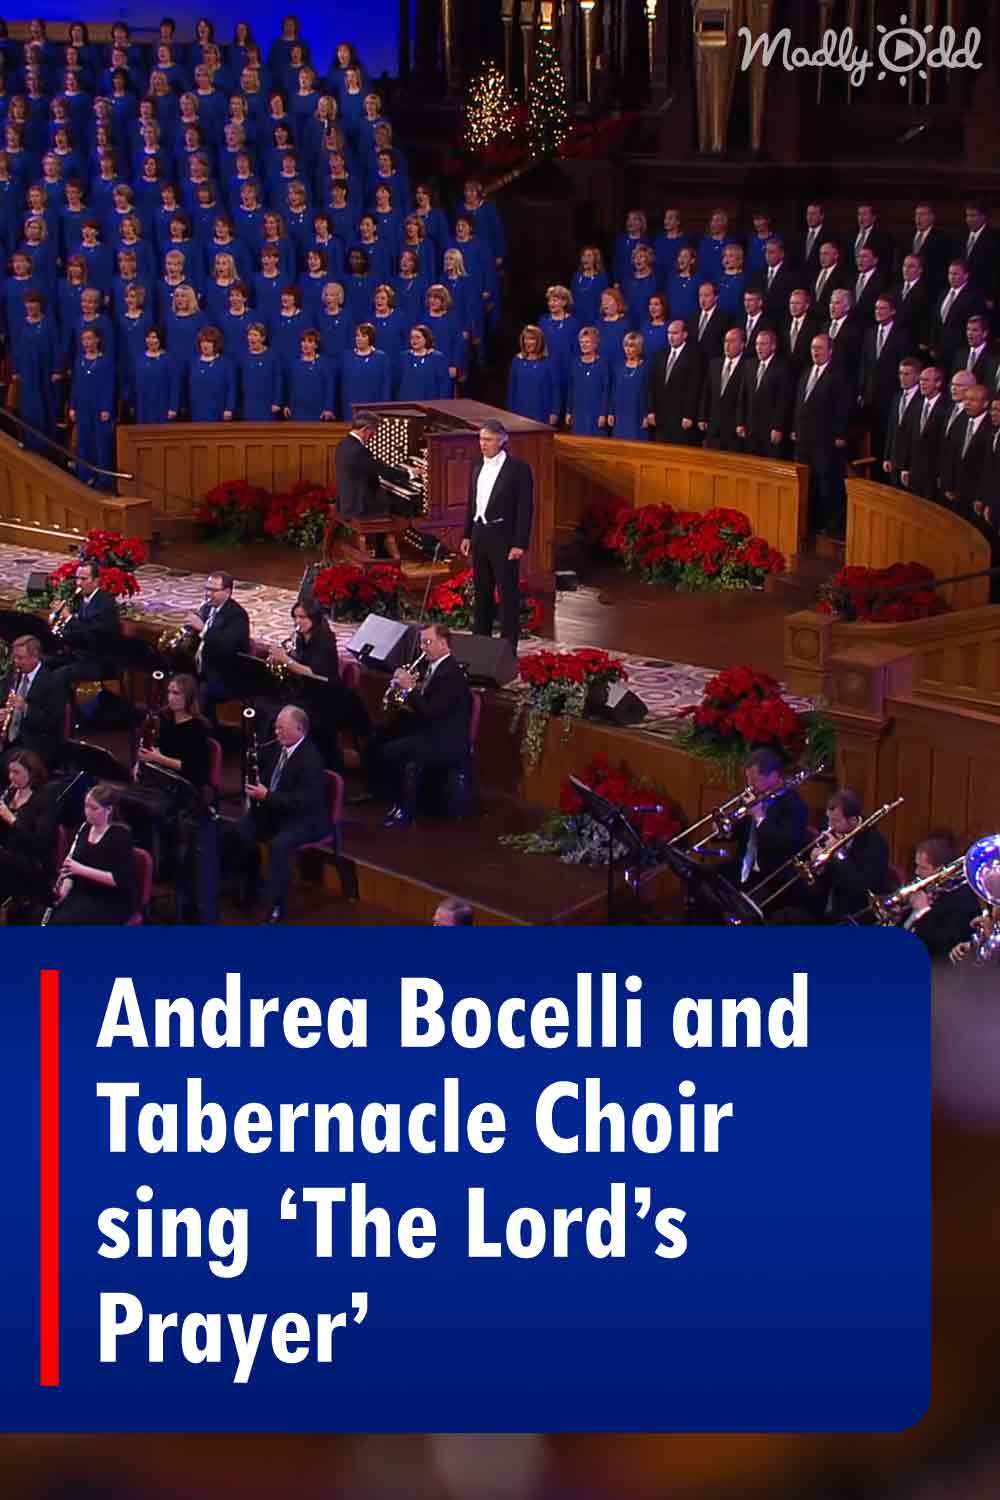 Andrea Bocelli and Tabernacle Choir sing ‘The Lord’s Prayer’